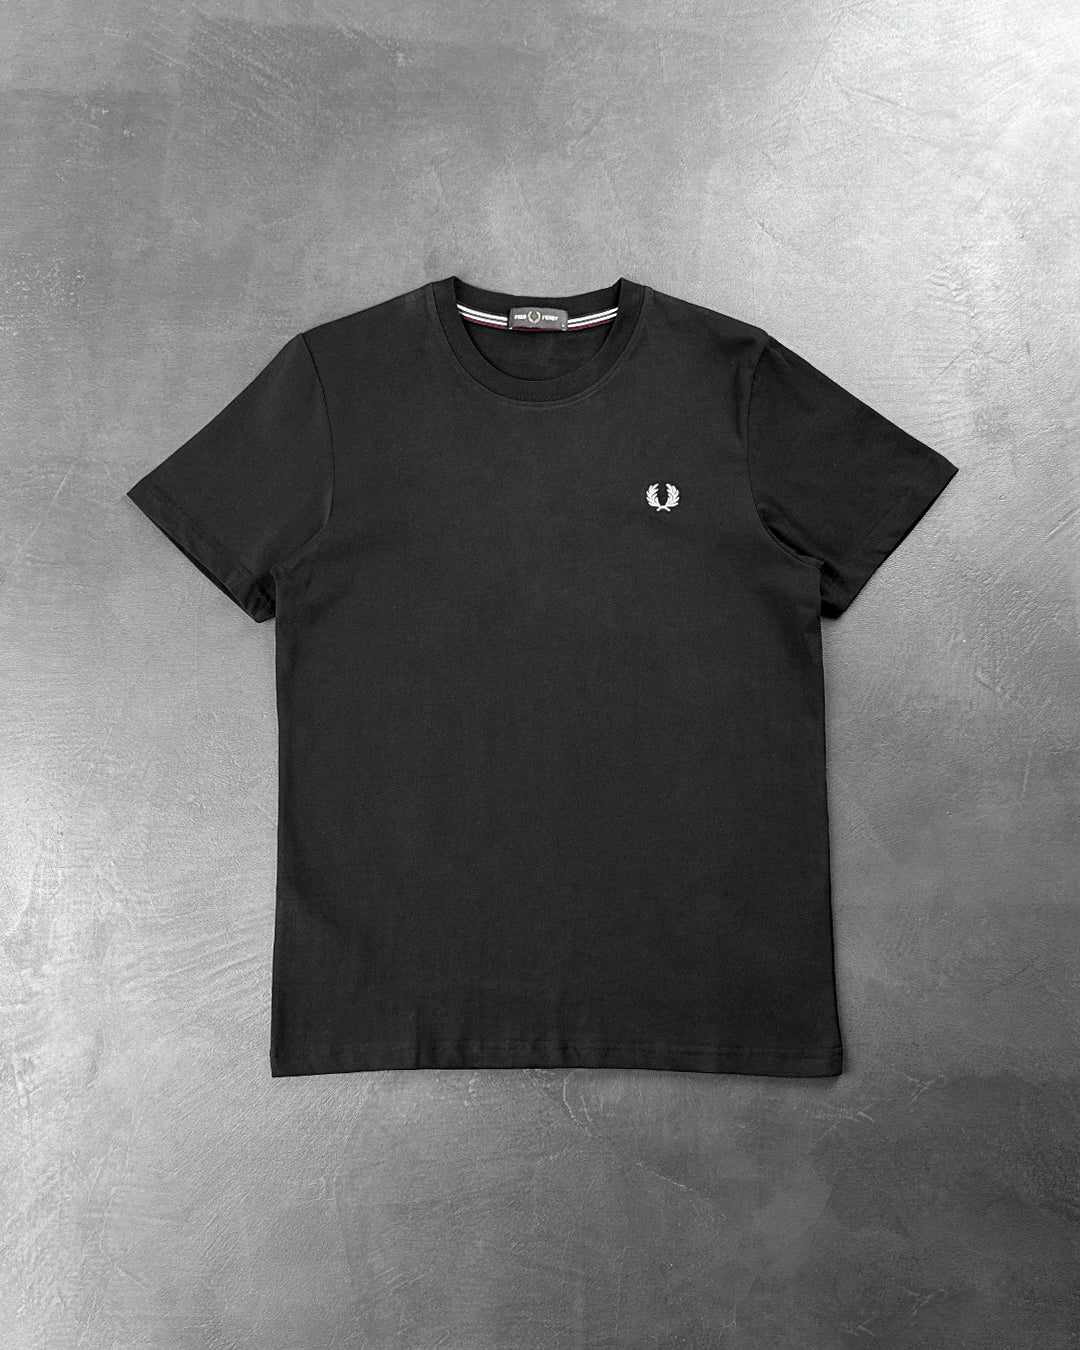 FRED PERRY Ringer T-Shirt Black with White Logo